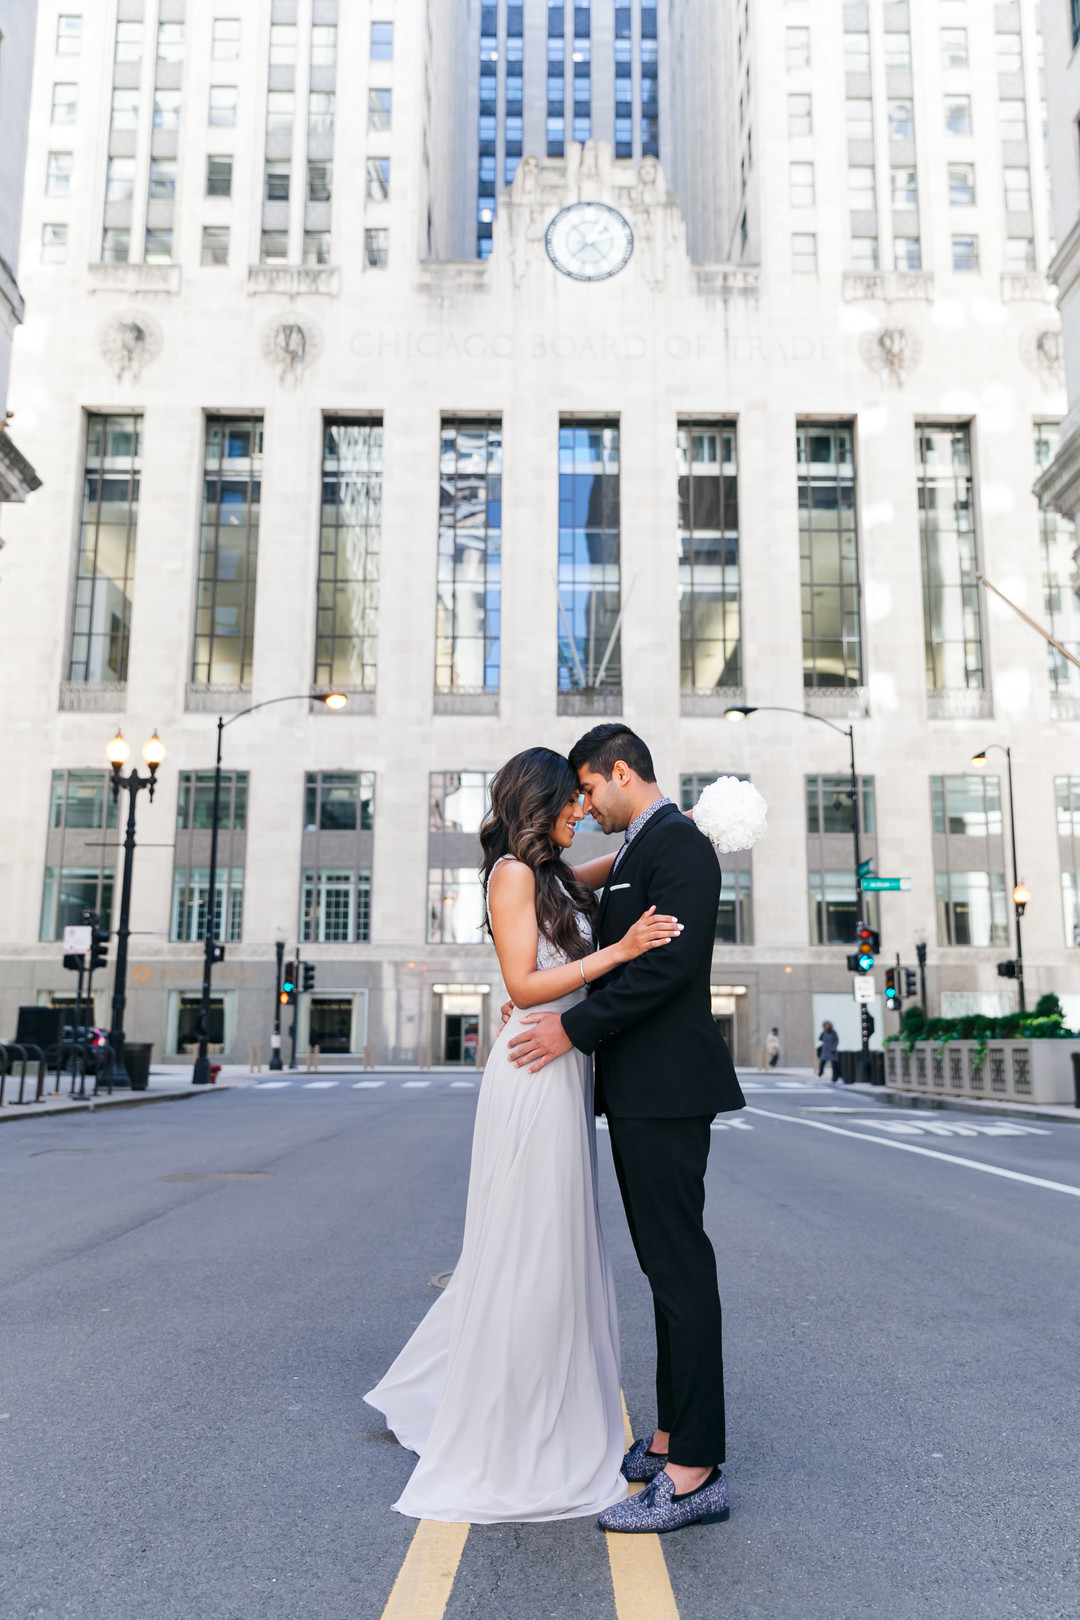 Intimate civil ceremony Chicago wedding in Olive Park captured by Janet D Photography. Find more wedding inspiration at CHItheeWED.com!